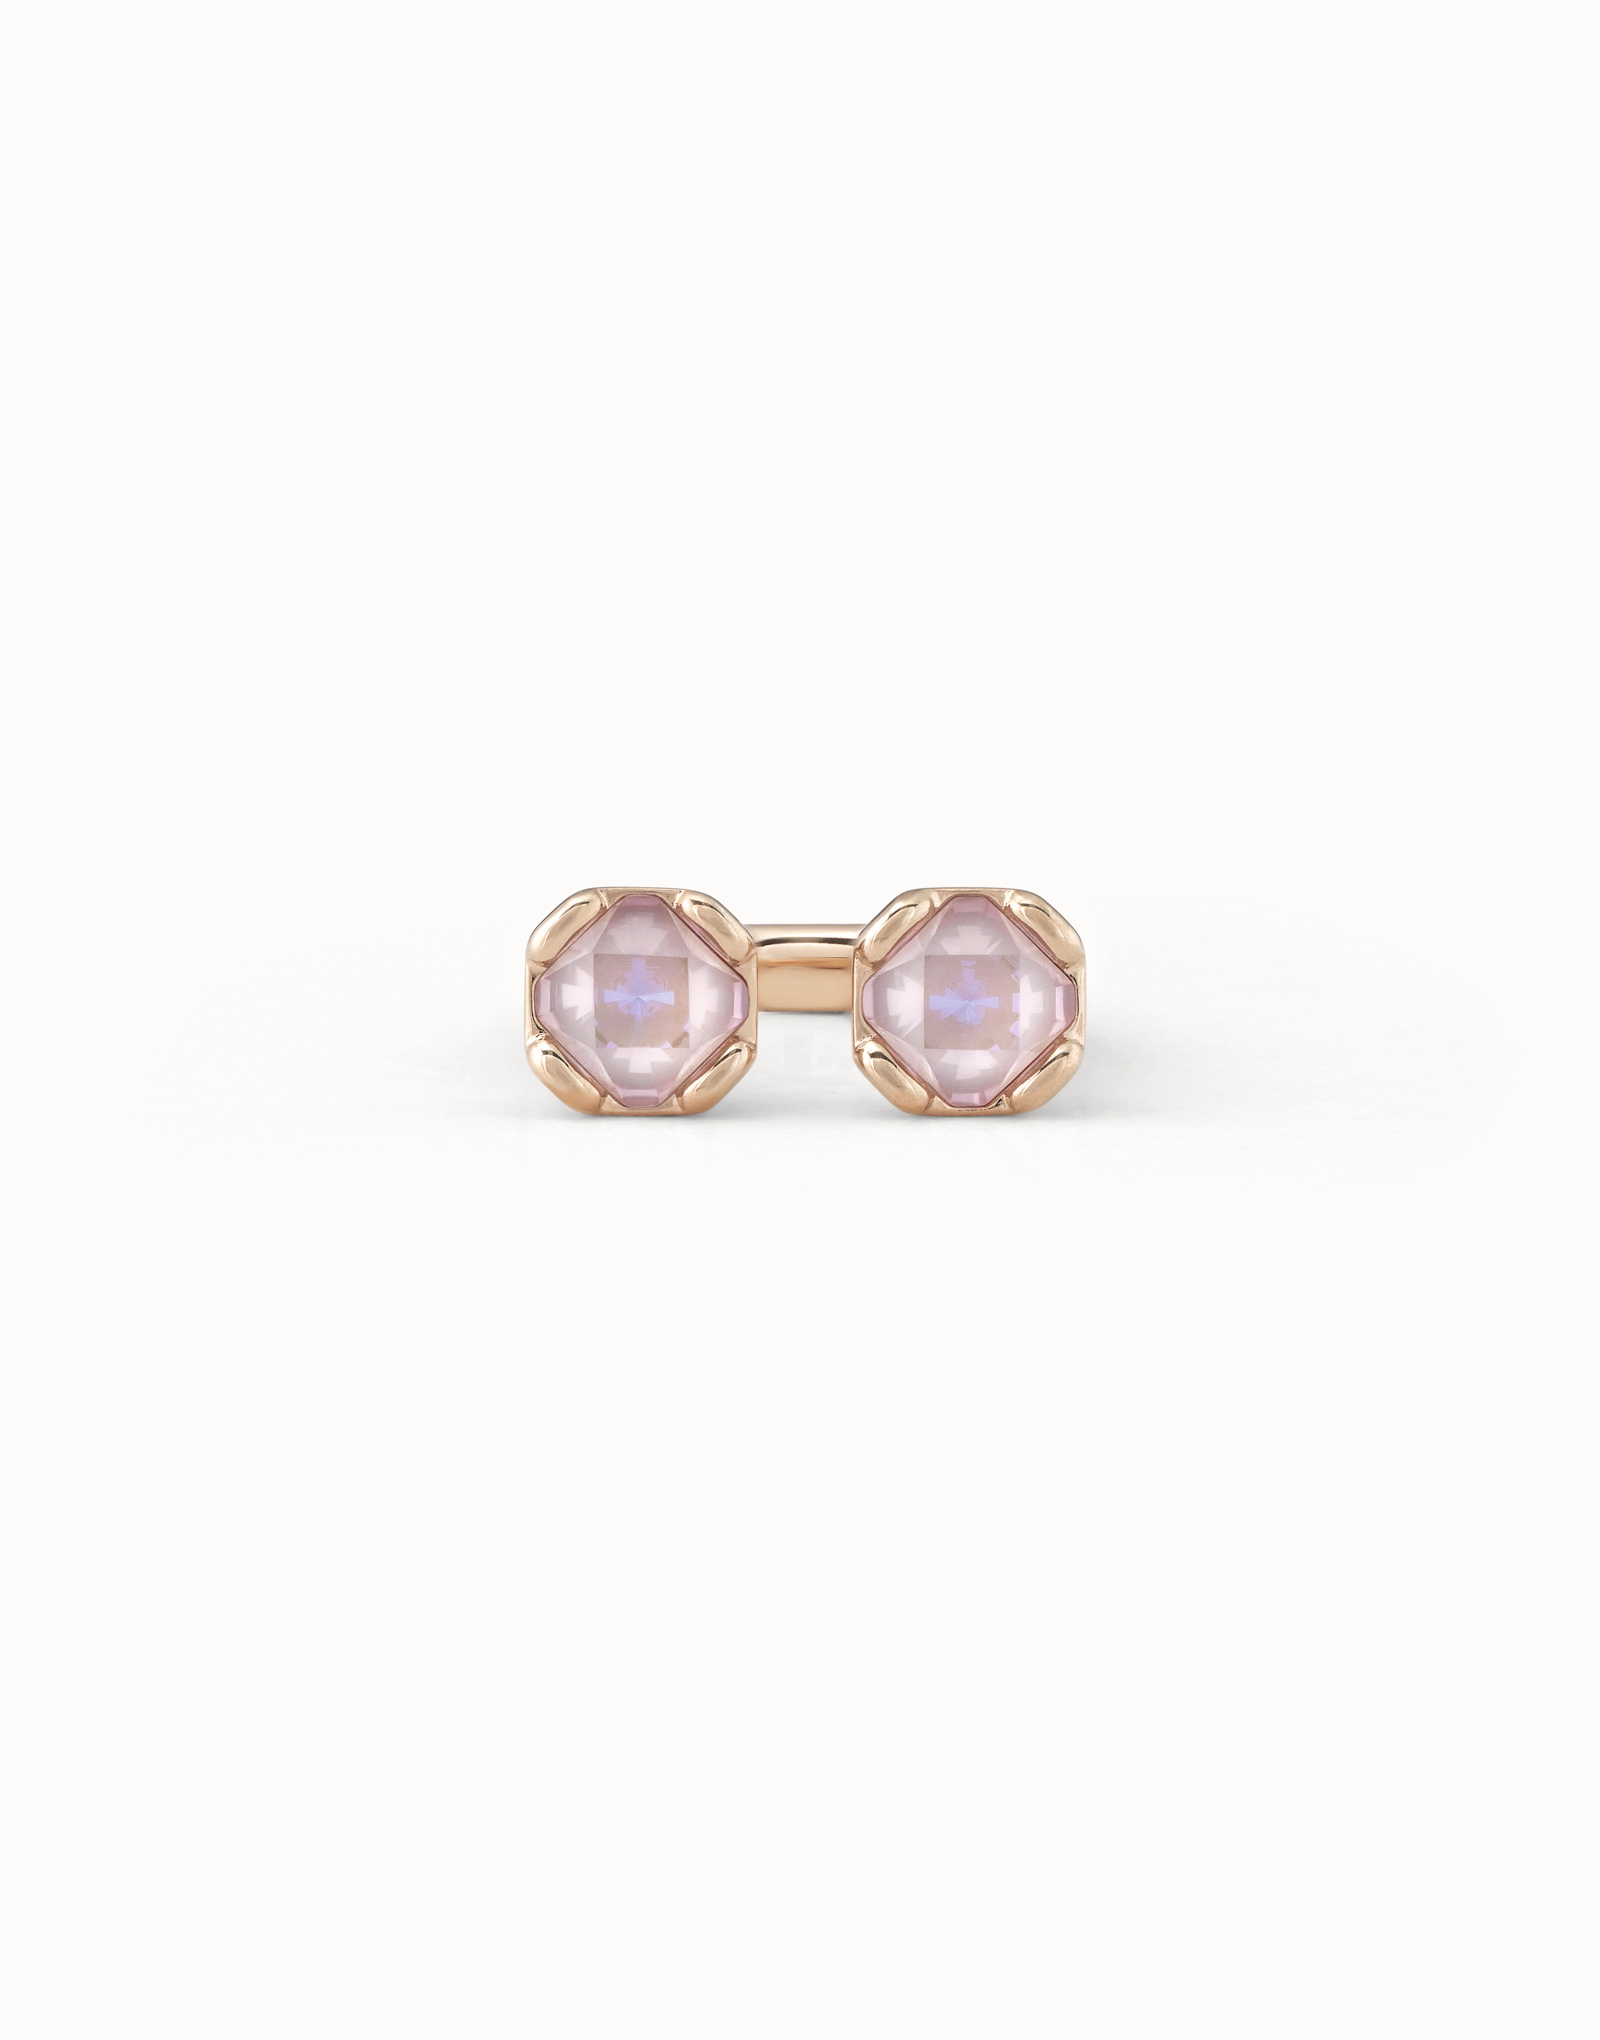 18K gold-plated ring with two pink crystals facing each other, Golden, large image number null